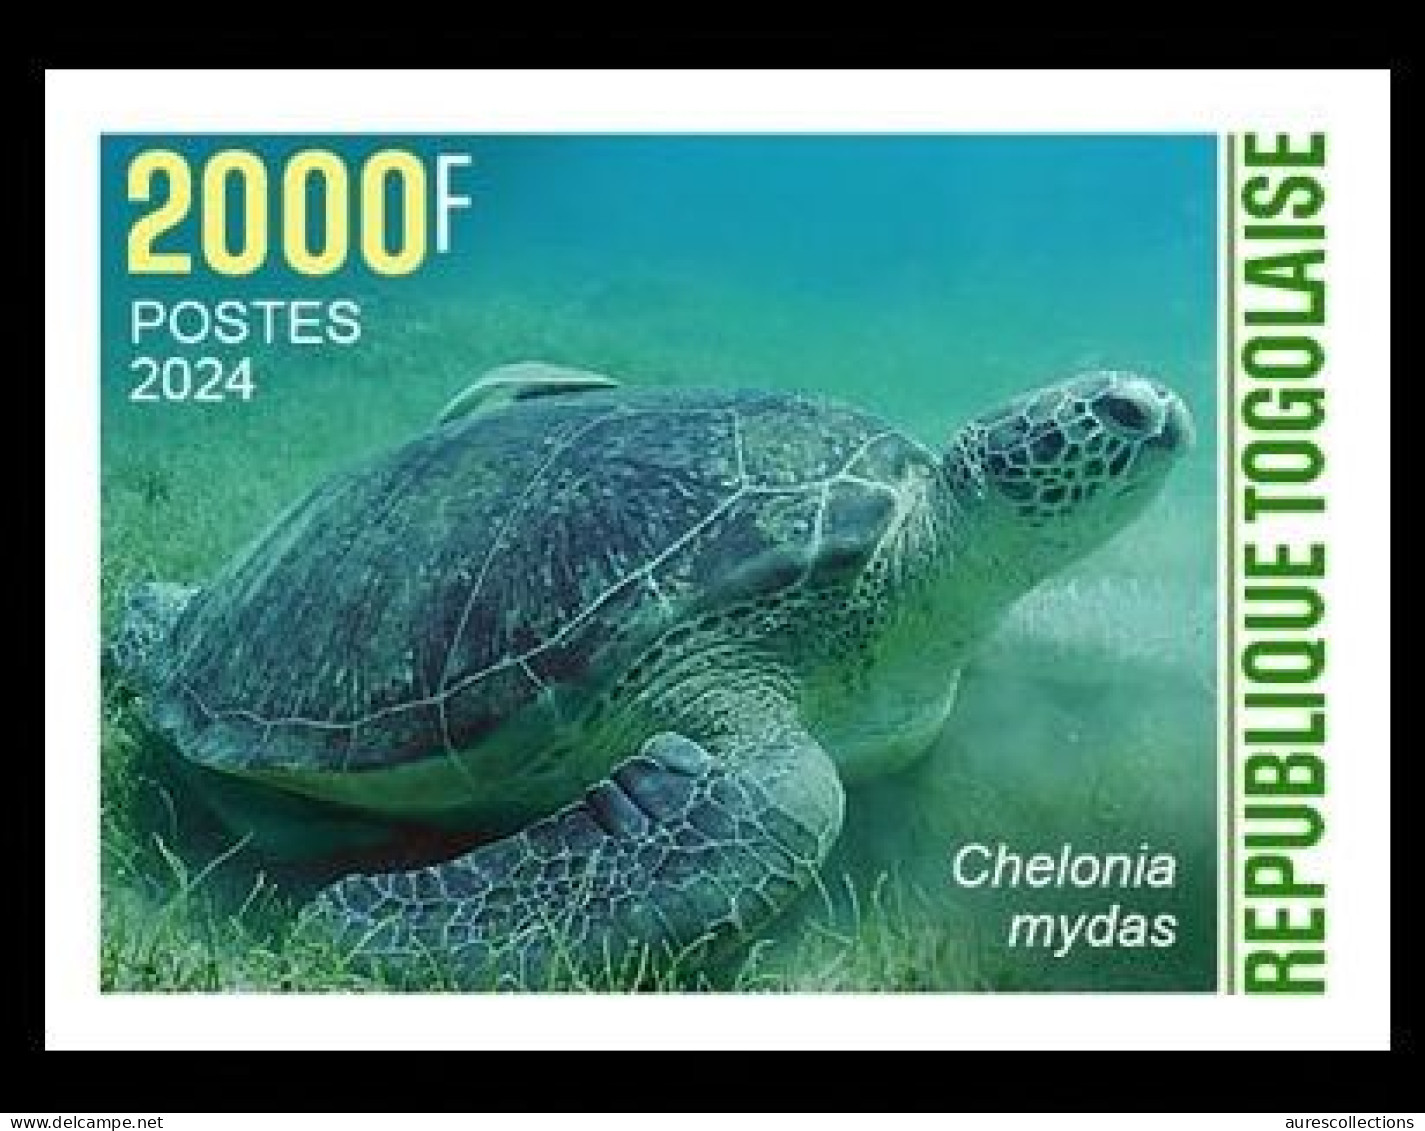 TOGO 2024 STAMP 1V IMPERF 2000F - CAMOUFLAGE - GREEN TURTLE TURTLES TORTUE VERTE TORTUES - REPTILES - MNH - Schildpadden